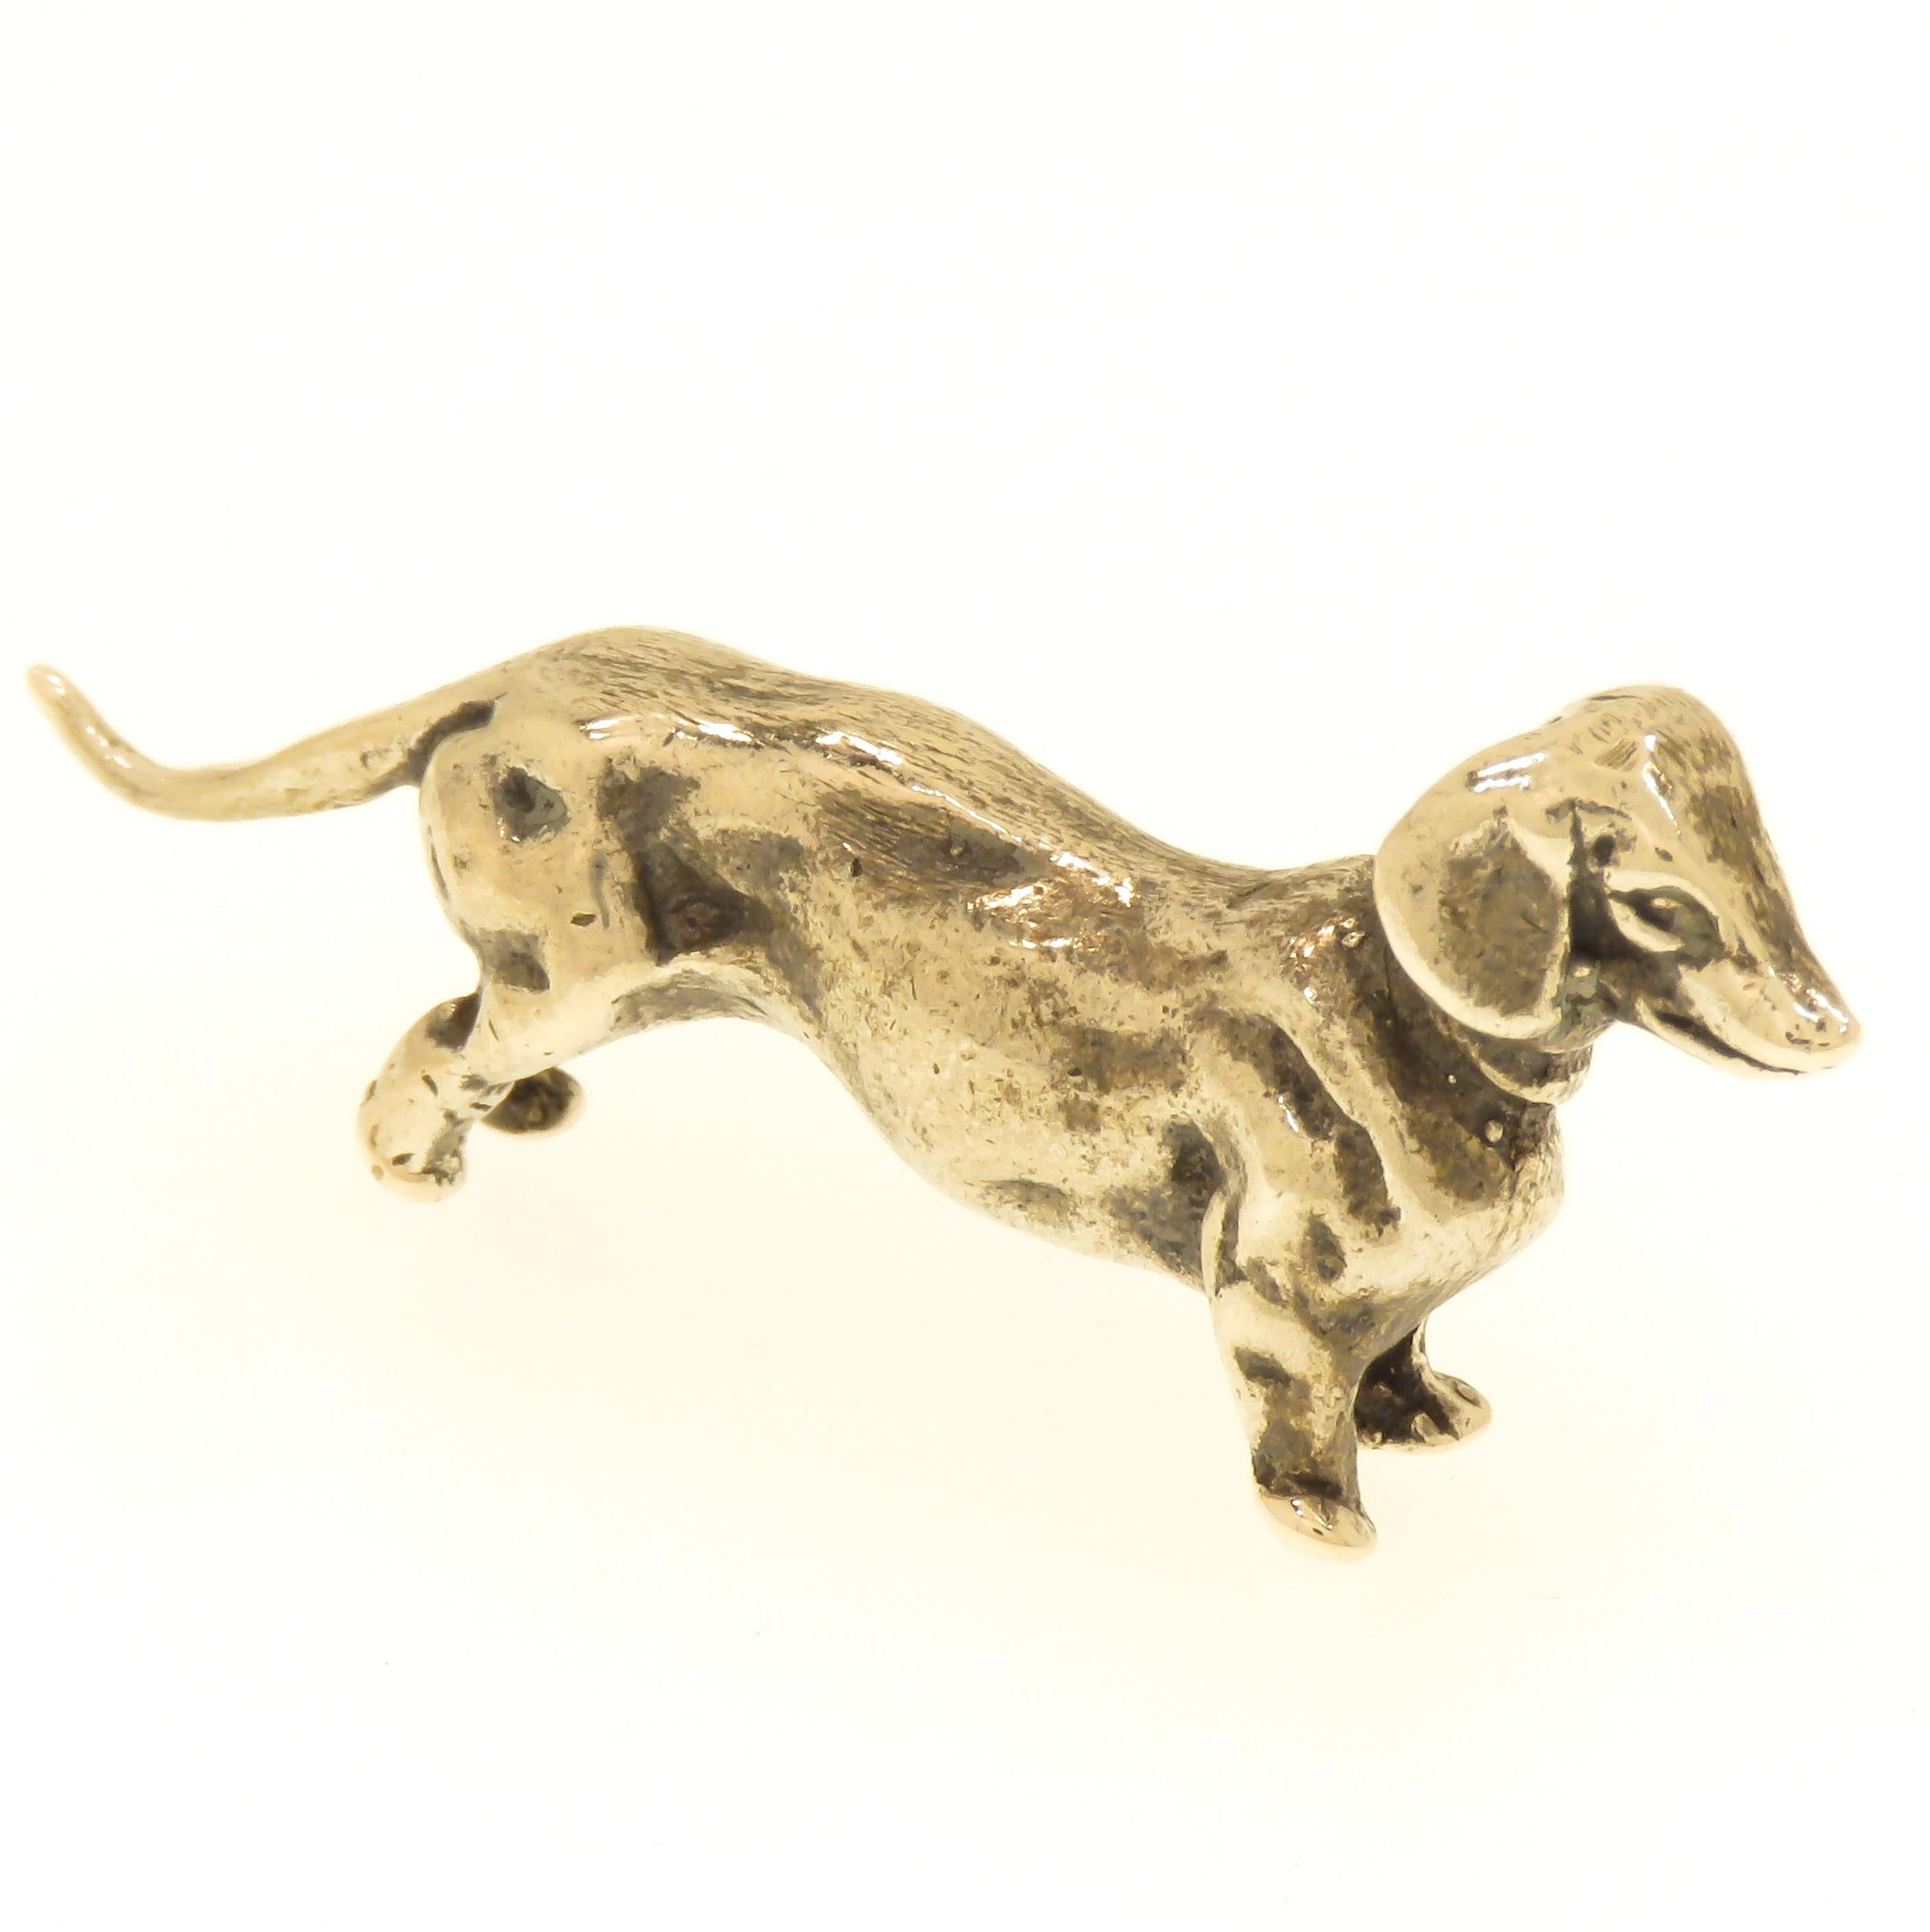 Solid silver dachshund very good vintage condition. Dimensions: Height 30 mm / 1.181 inches - Length 48 mm / 1.889inches - Weight 15 grams. It  is marked with the Silver Italian Mark 800 - Made in Italy

Hancrafted in: silver 800.
Dimension: 30x48